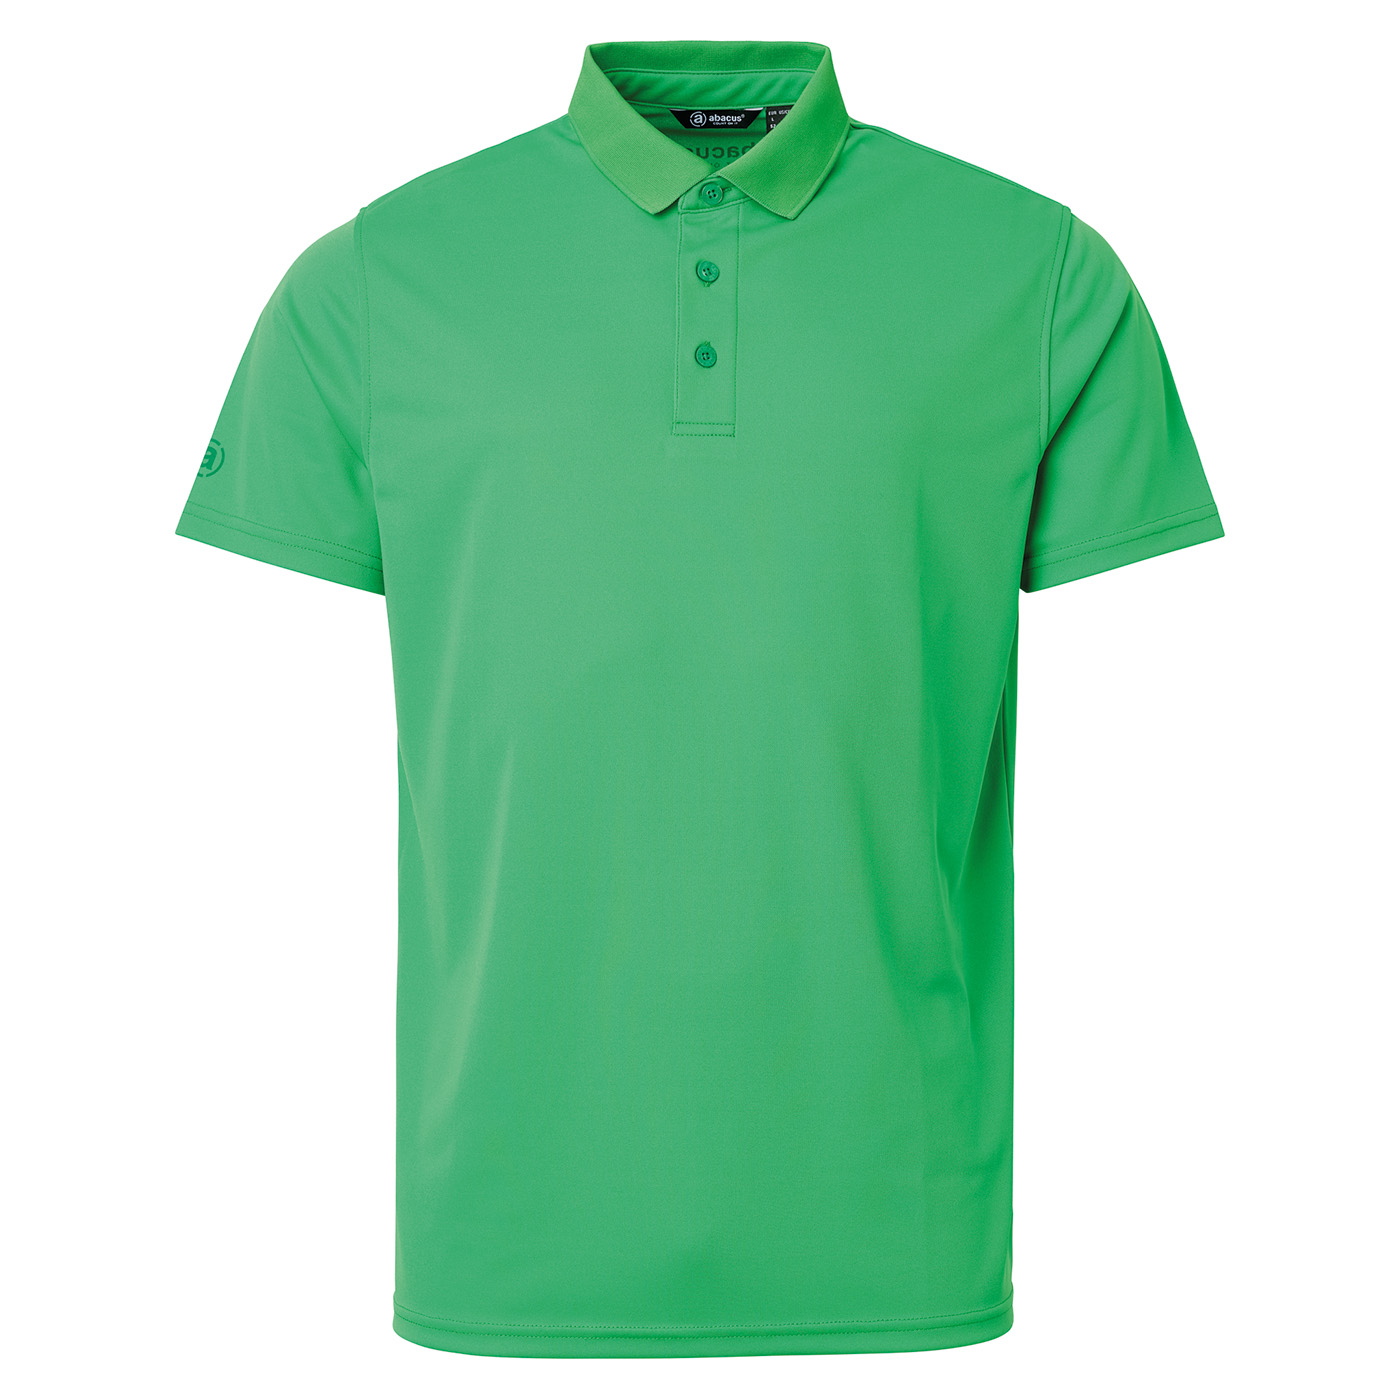 Jr Cray polo - fairway in the group JUNIOR / All clothing at Abacus Sportswear (5164504)